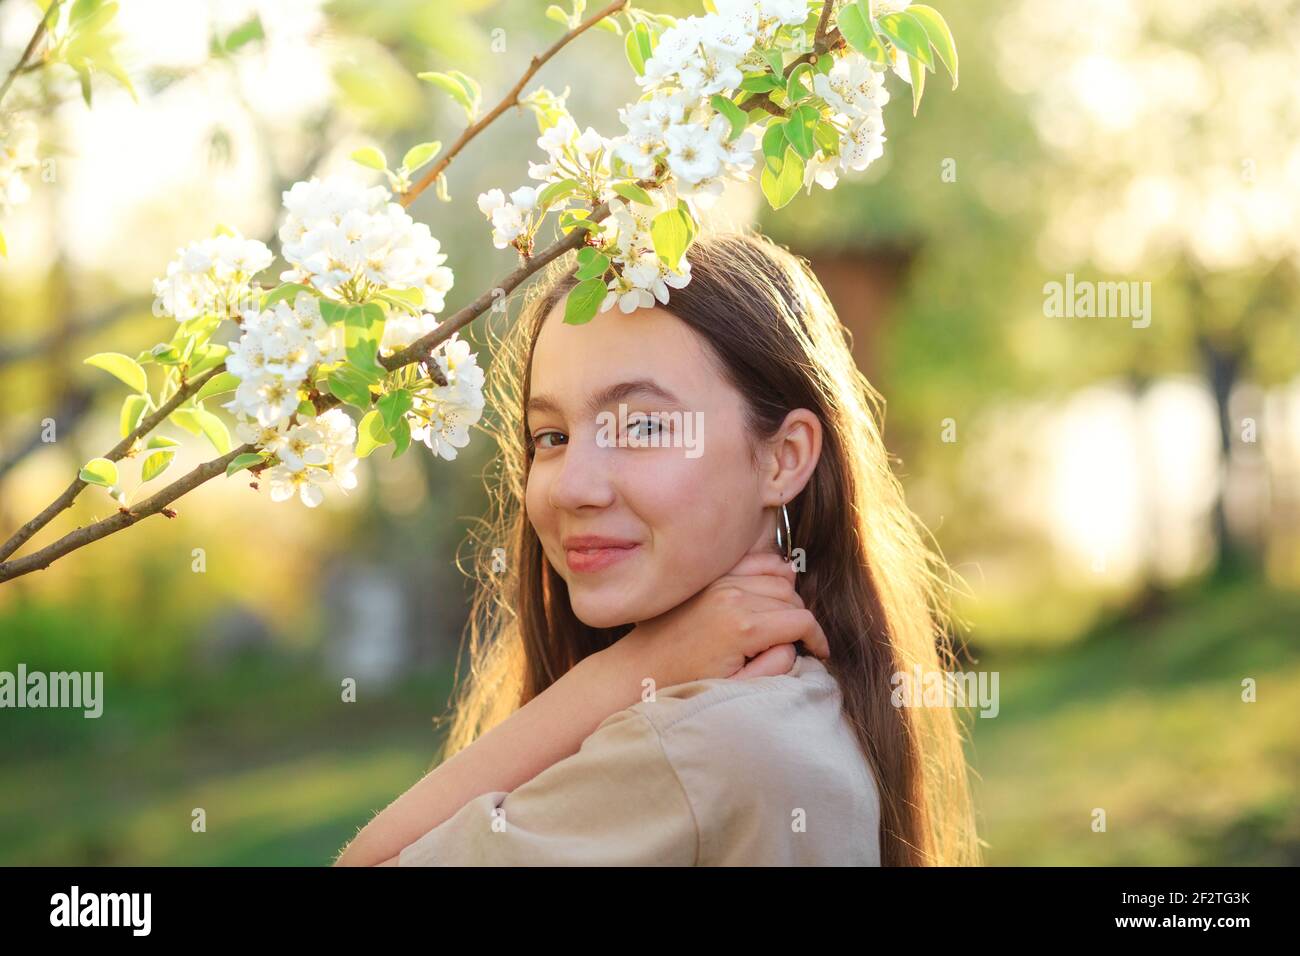 Beautiful teenager girl with blooming apple flowers. Happy cute kid having fun outdoors at sunset. Stock Photo